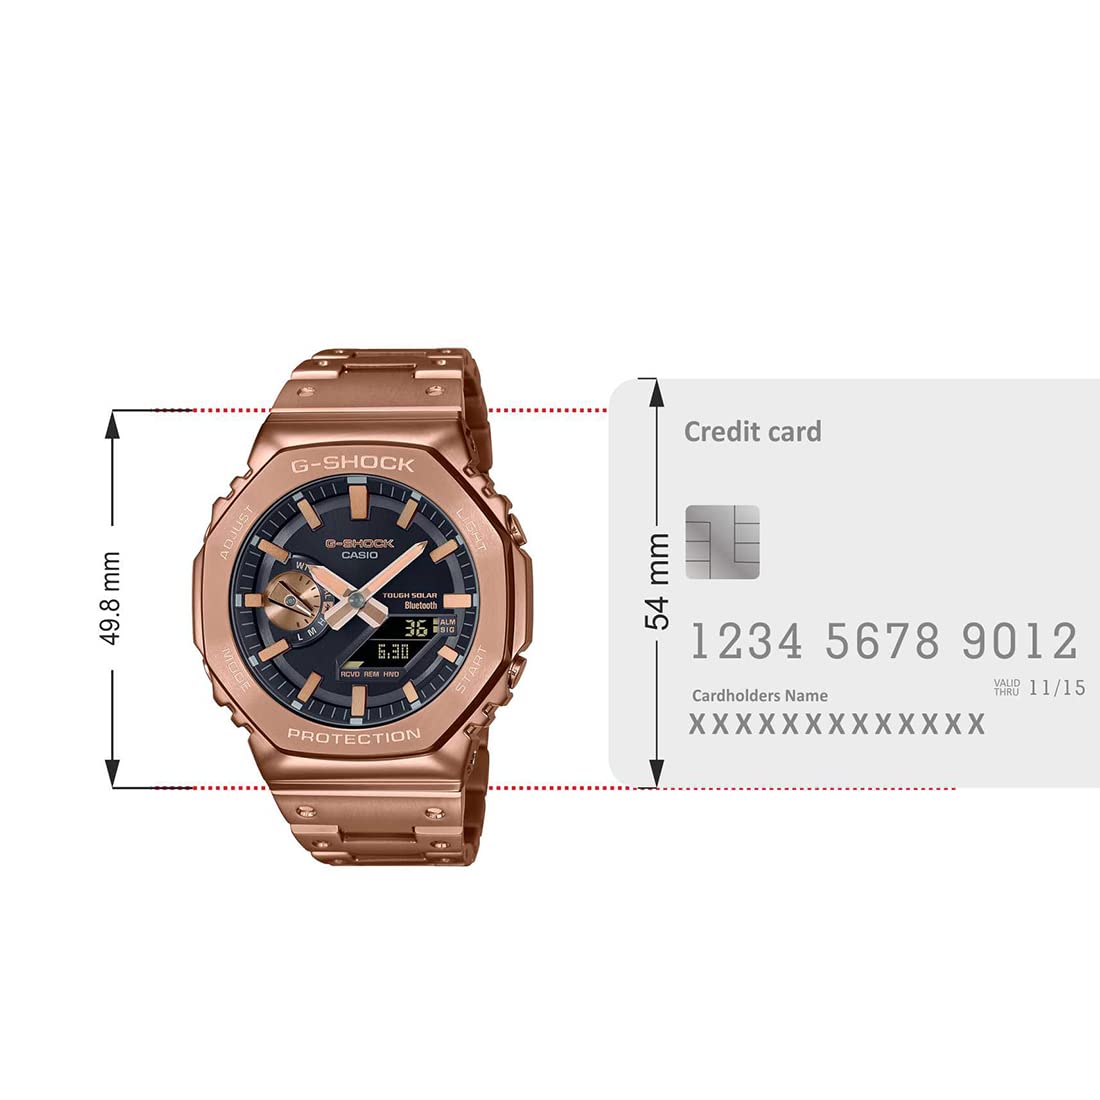 Casio G-Shock Analog-Digital Stainless Steel Solid Band Black Dial Rose Gold Band Men Watch GM-B2100GD-5ADR (G1272)